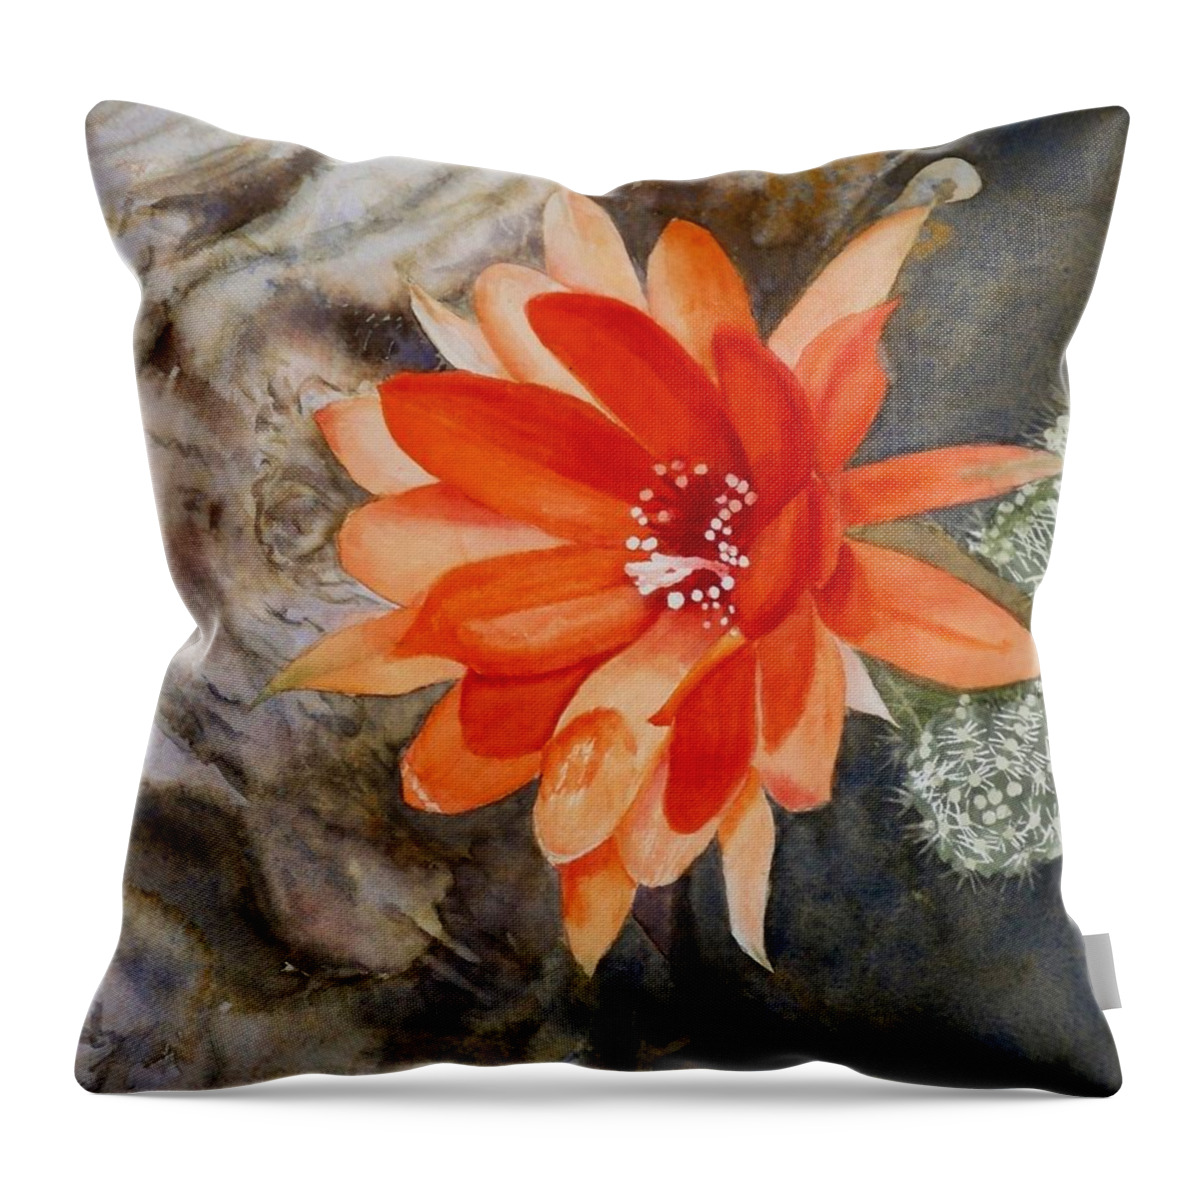 Flower Throw Pillow featuring the painting Orange Cactus Flower II by Deane Locke